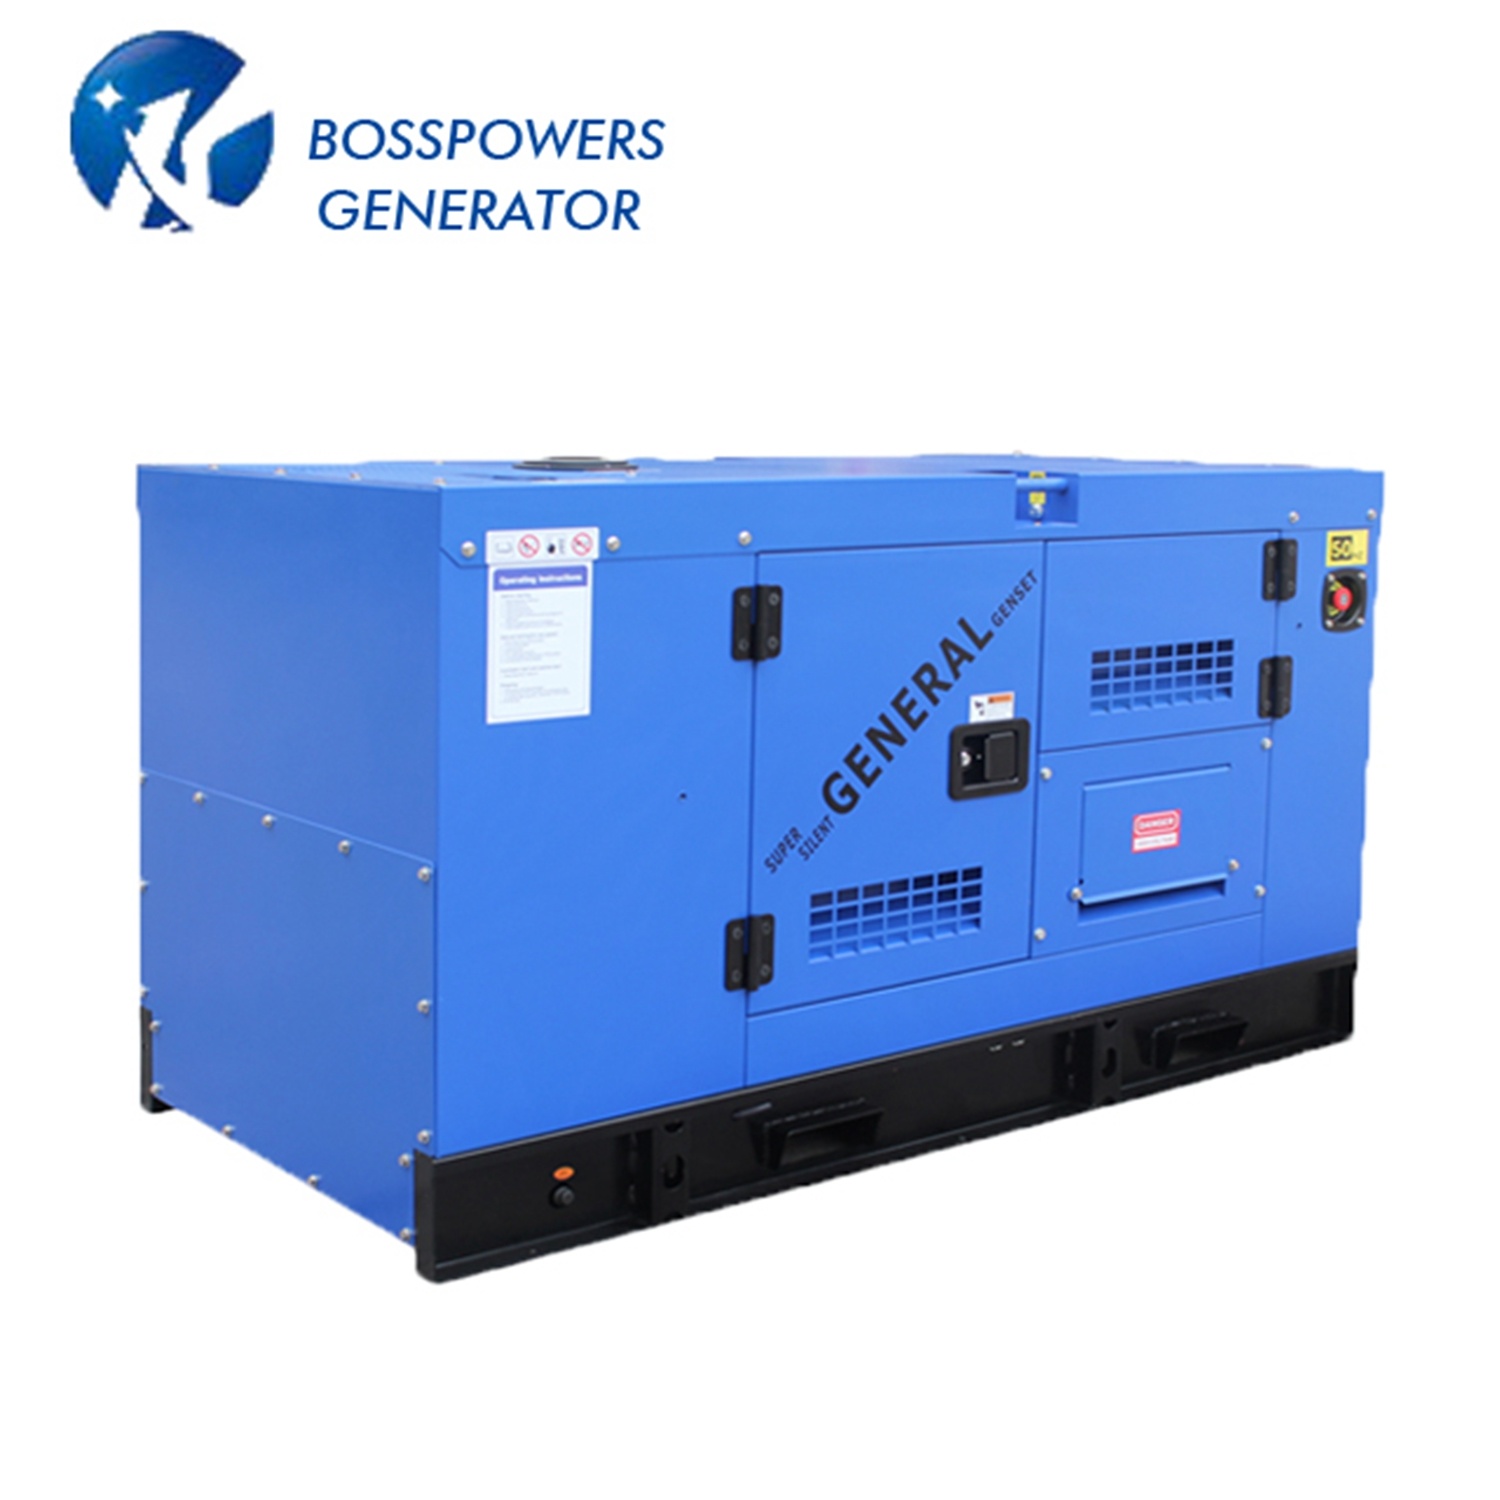 Silent Diesel Generator with ATS Smartgen Powered by Ccec Nta855-G1b